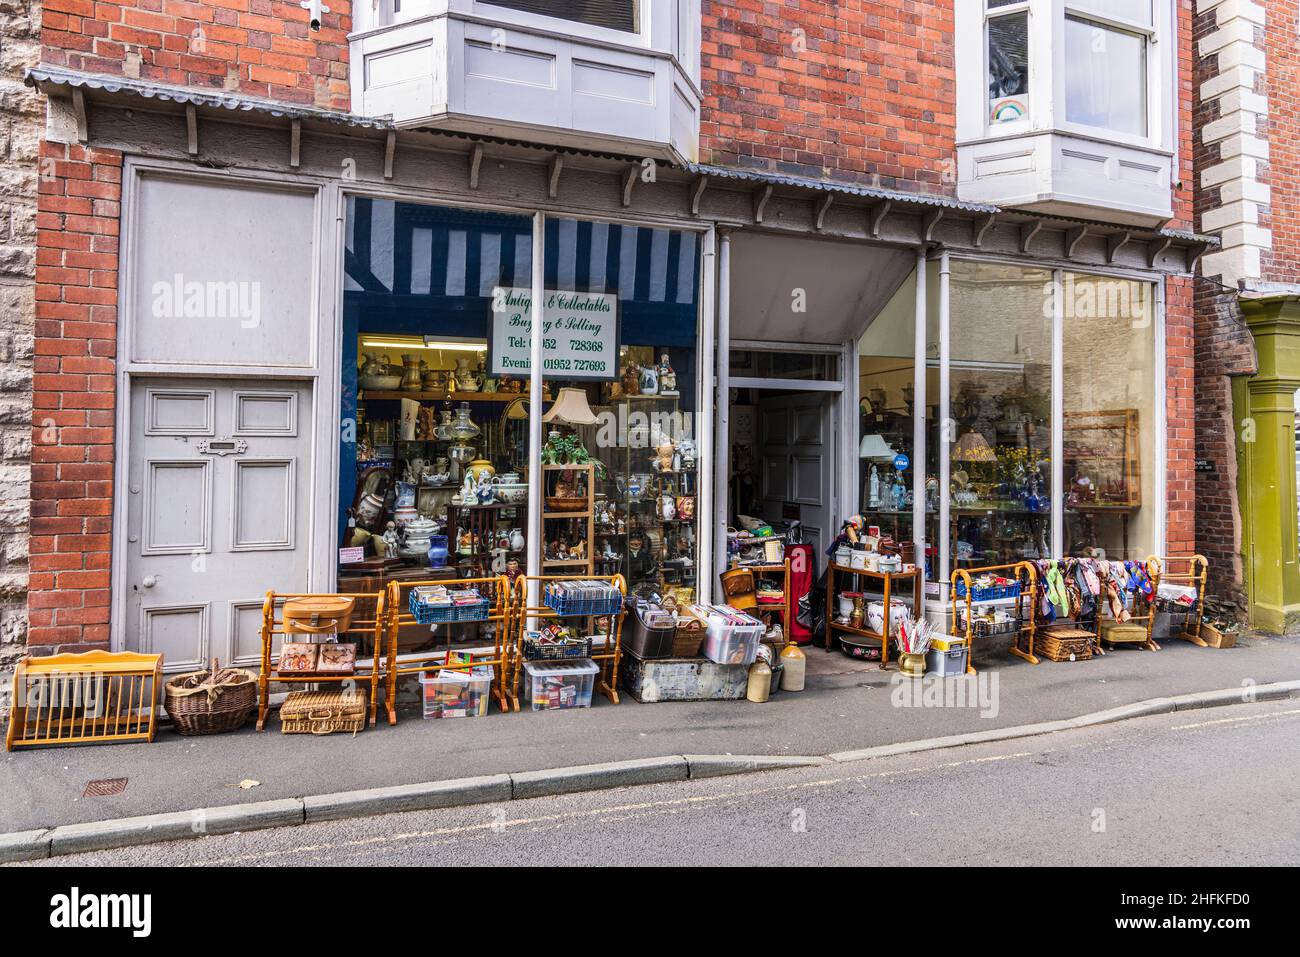 Second hand antique and collectibles shop in Much Wenlock, Shropshire, England Stock Photo